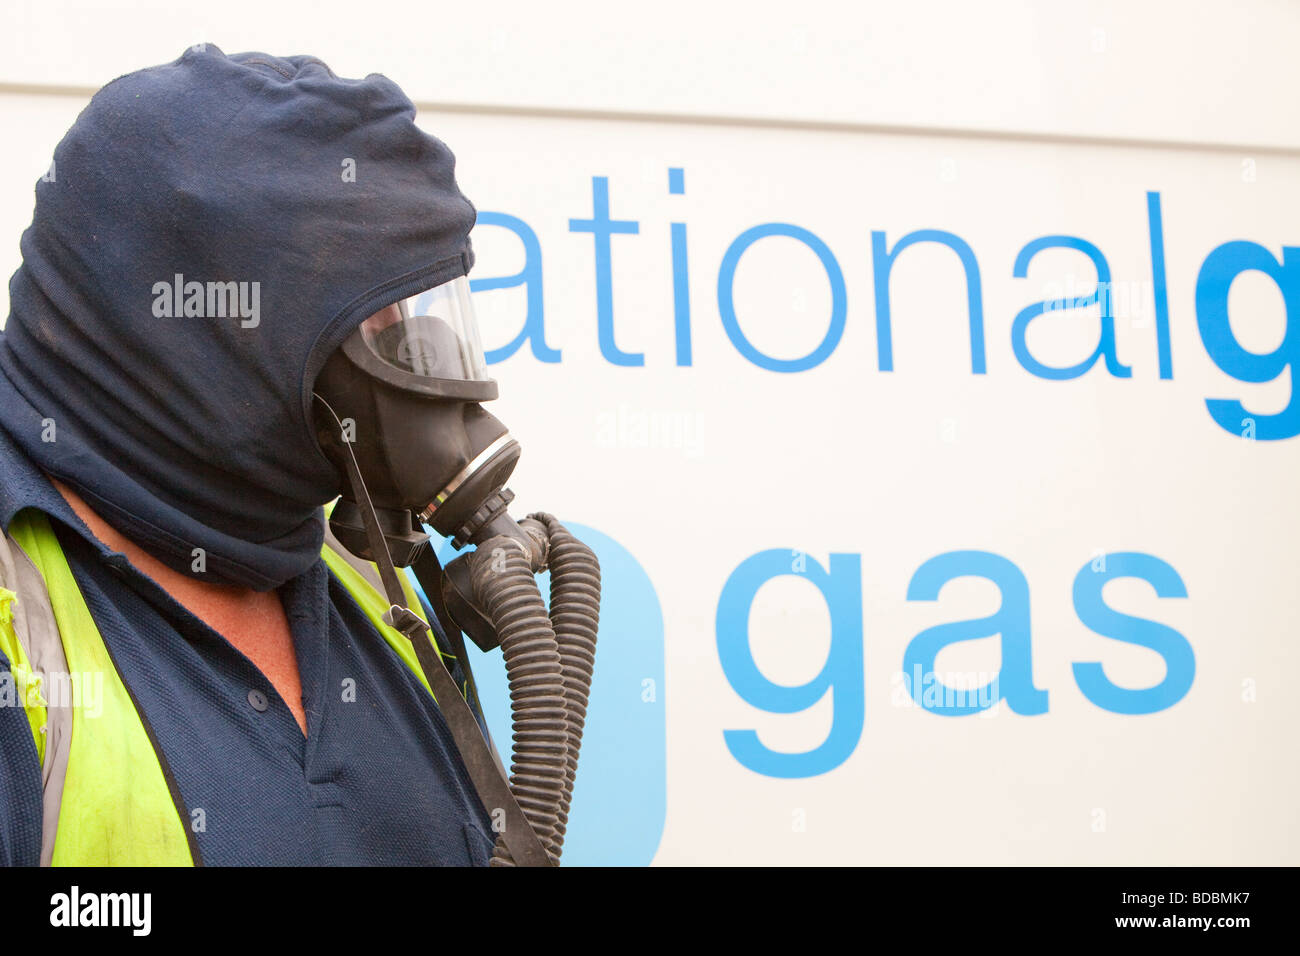 A Britiush Gas worker wears protective gas mask prior to cutting through the gas main as part of an upgrade of piping Stock Photo